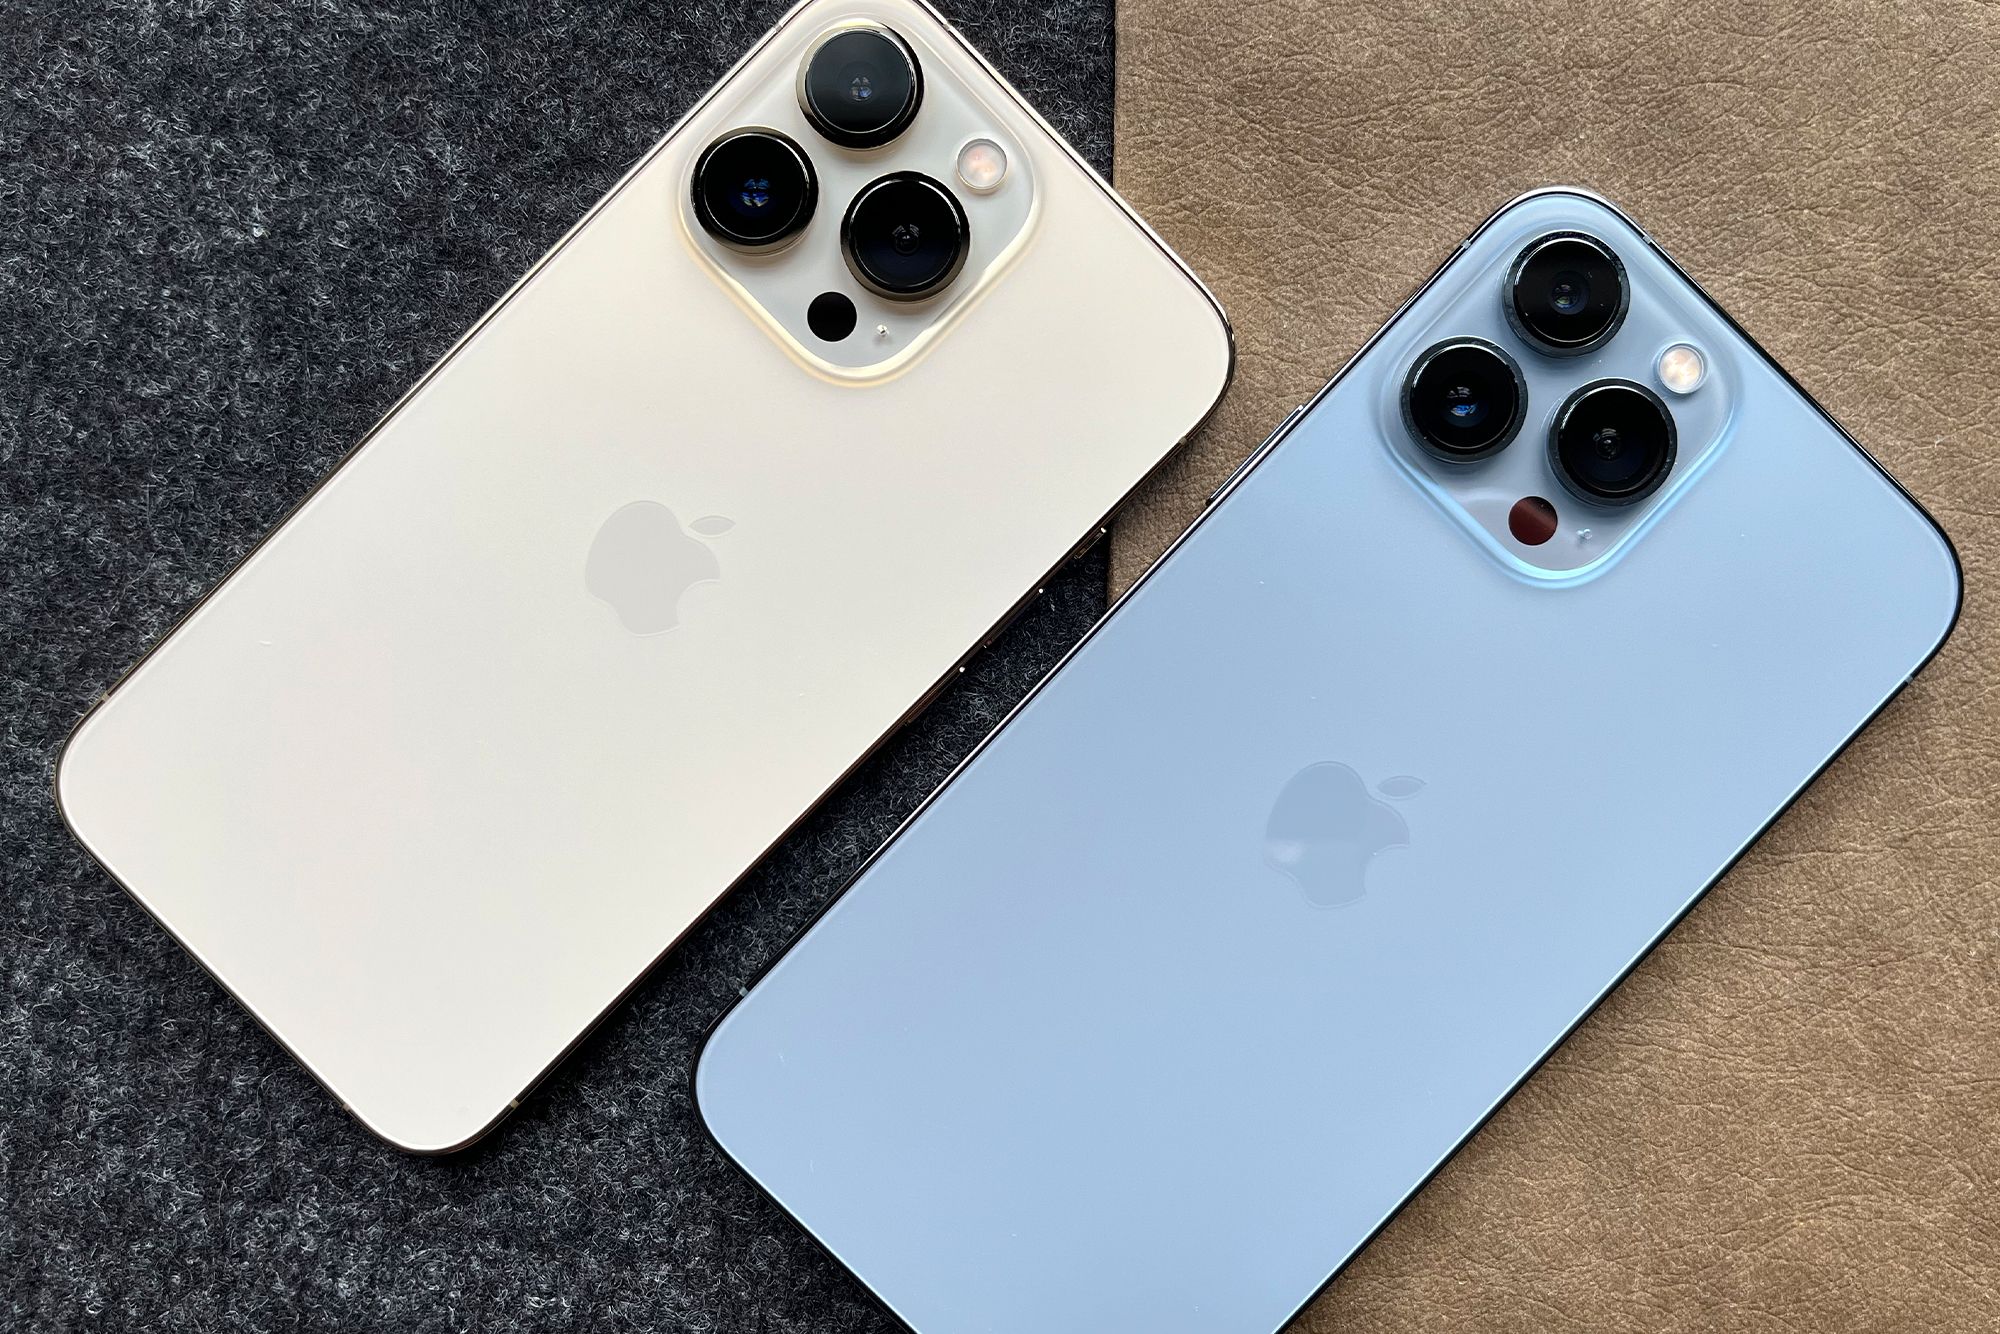 5 things we like about the iPhone 13 Pro Max